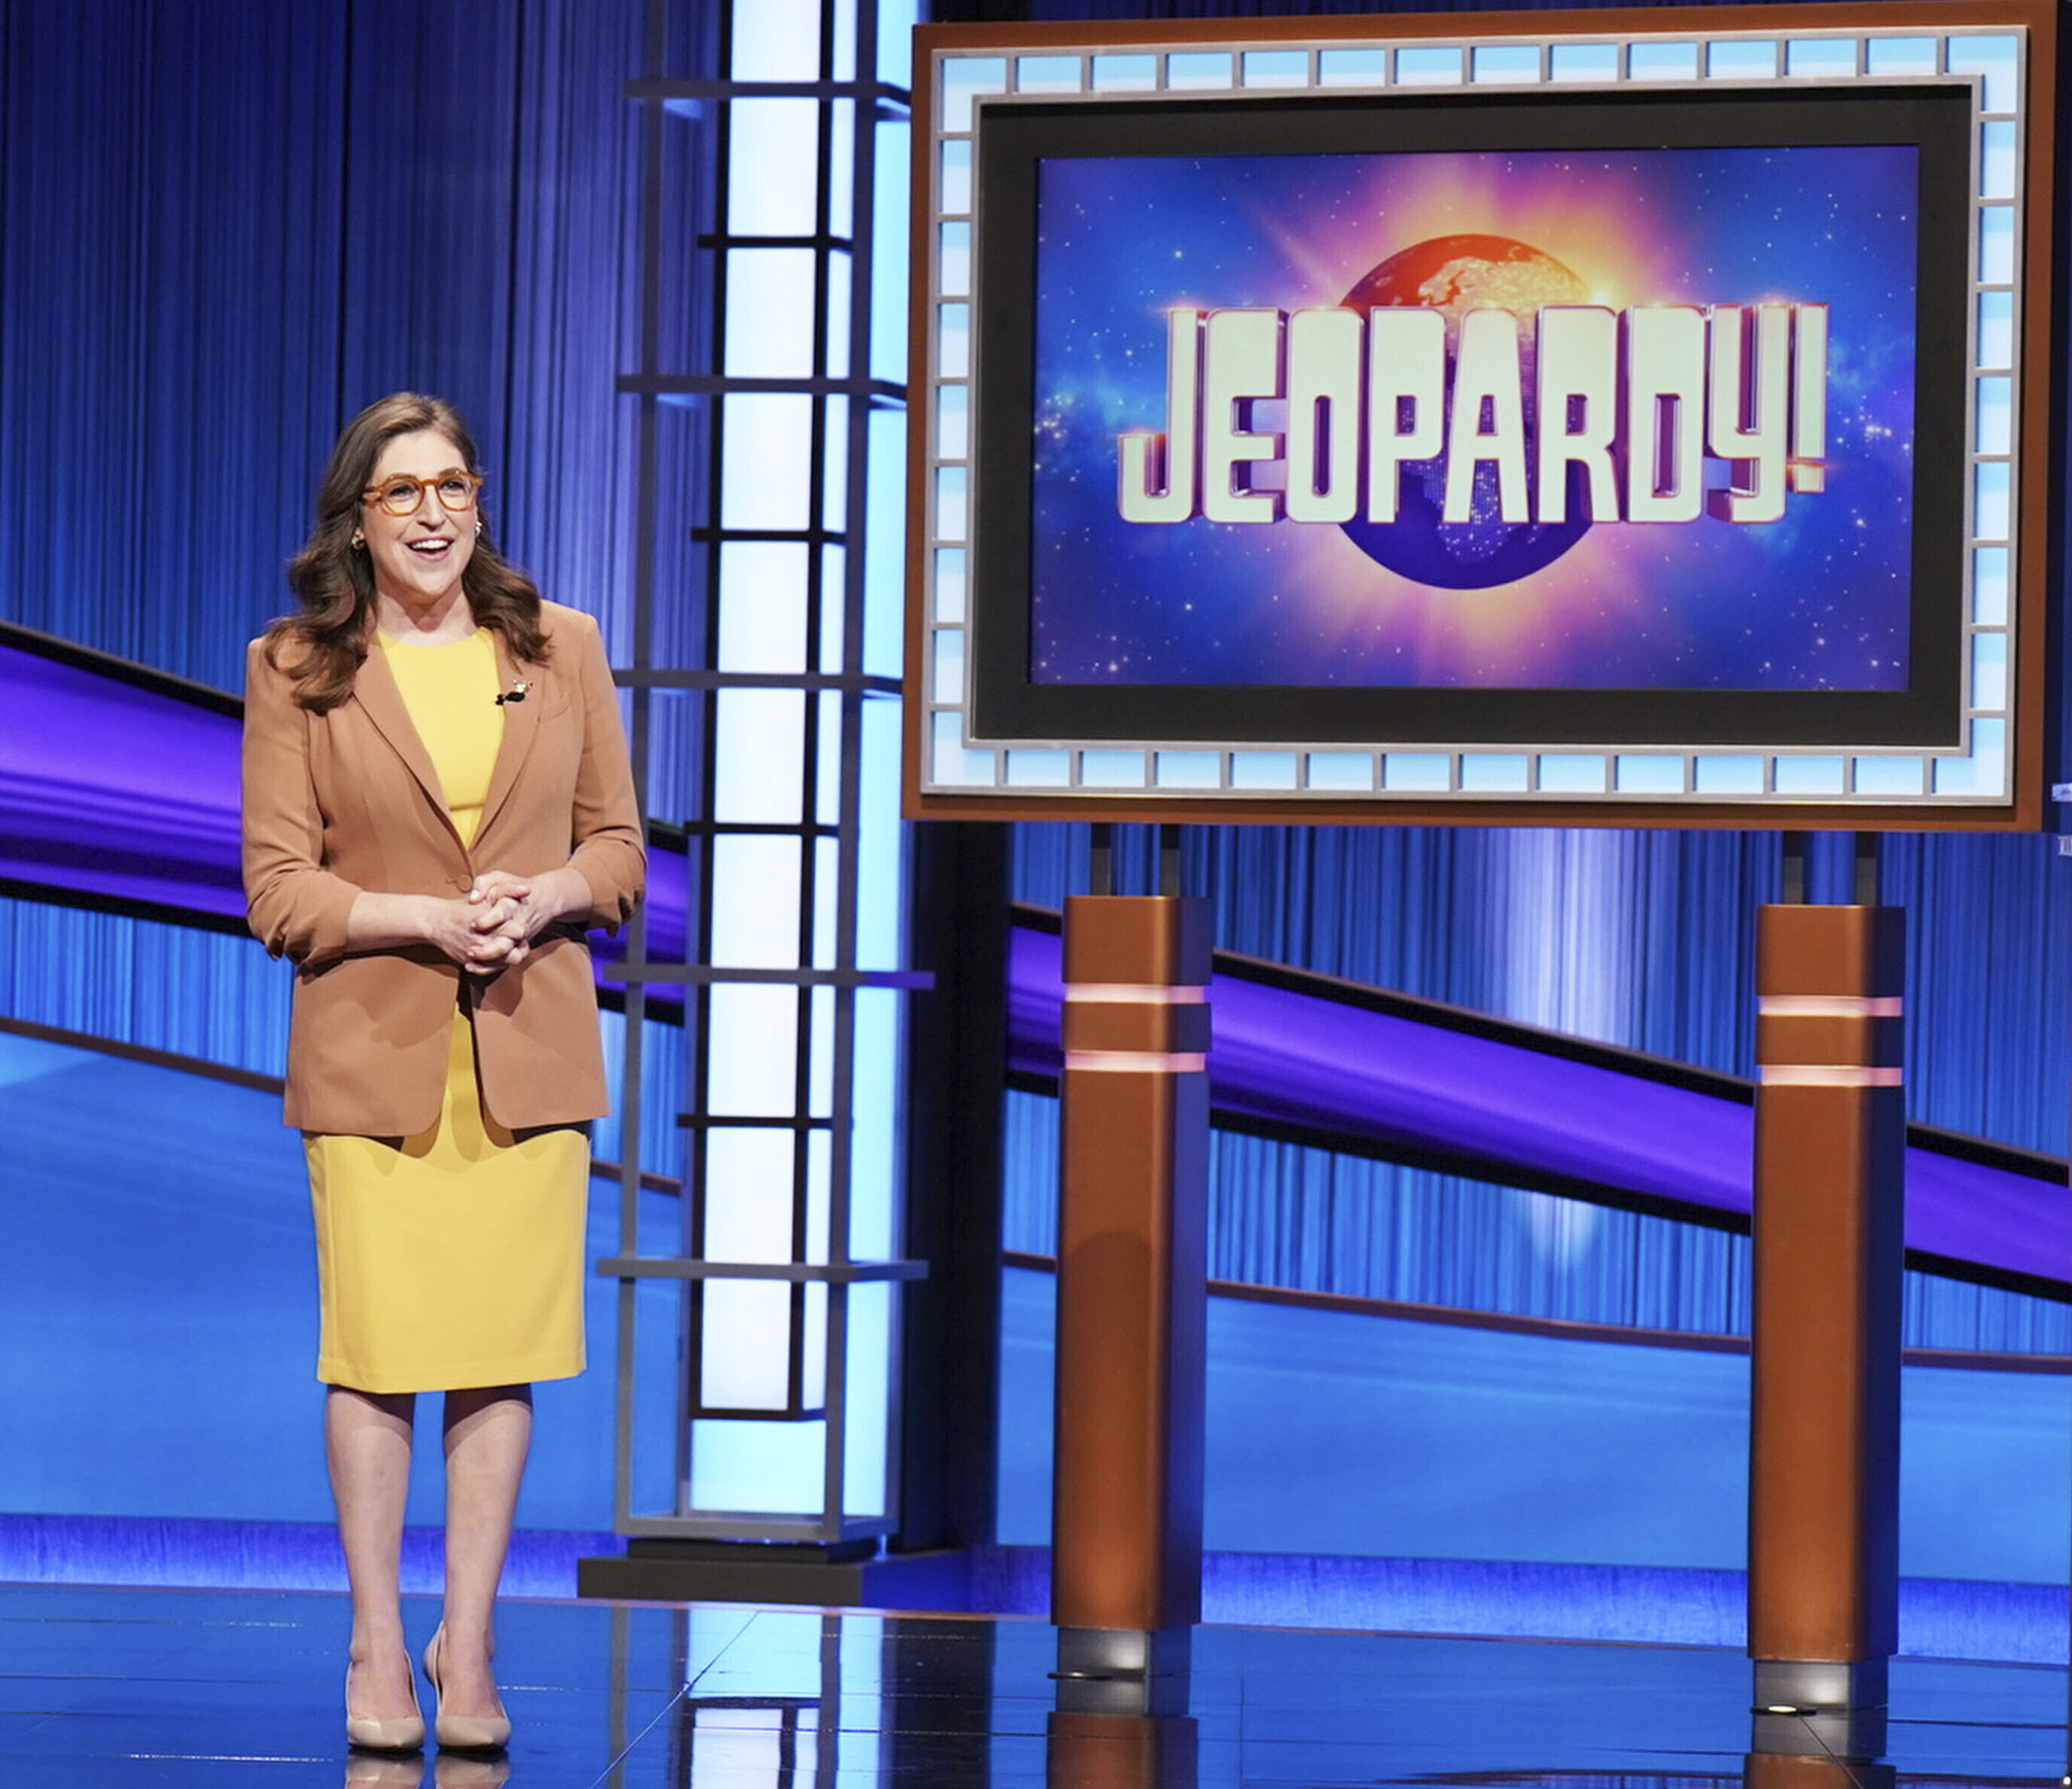 Juveria participated in Jeopardy's Season 39 Second Chance finals